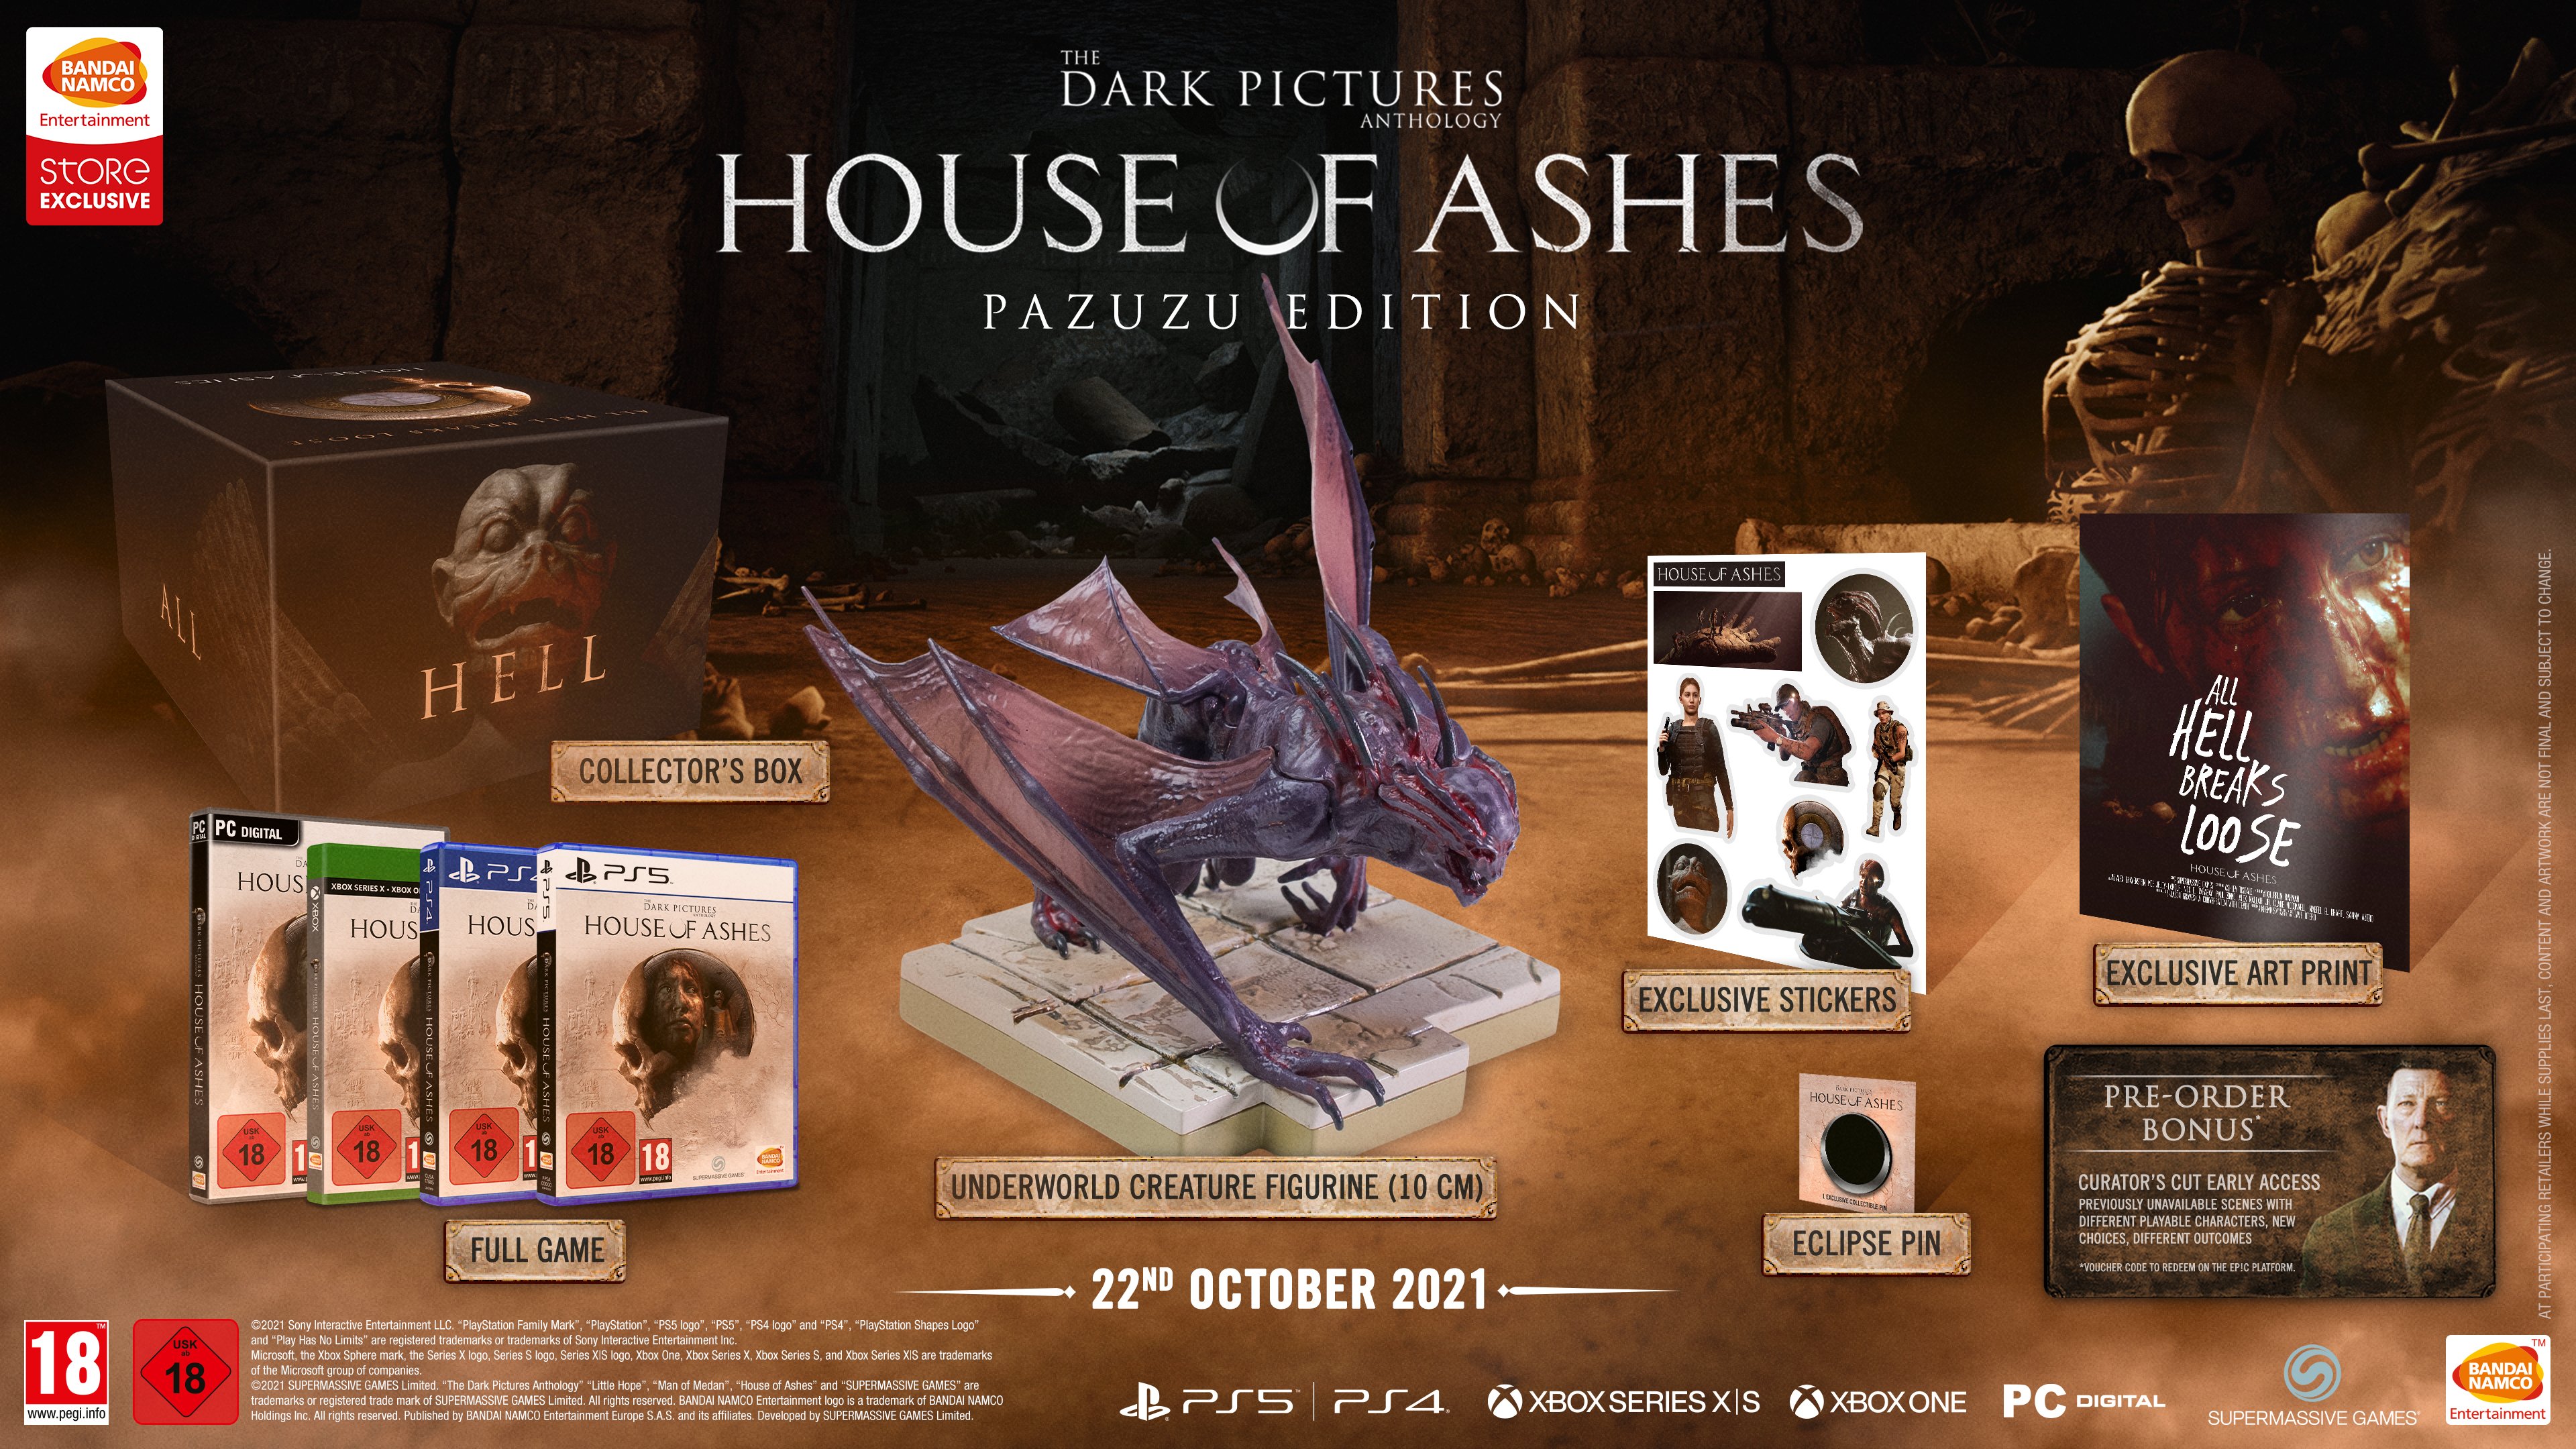 The Dark Pictures Anthology: House of Ashes Pazuzu Edition